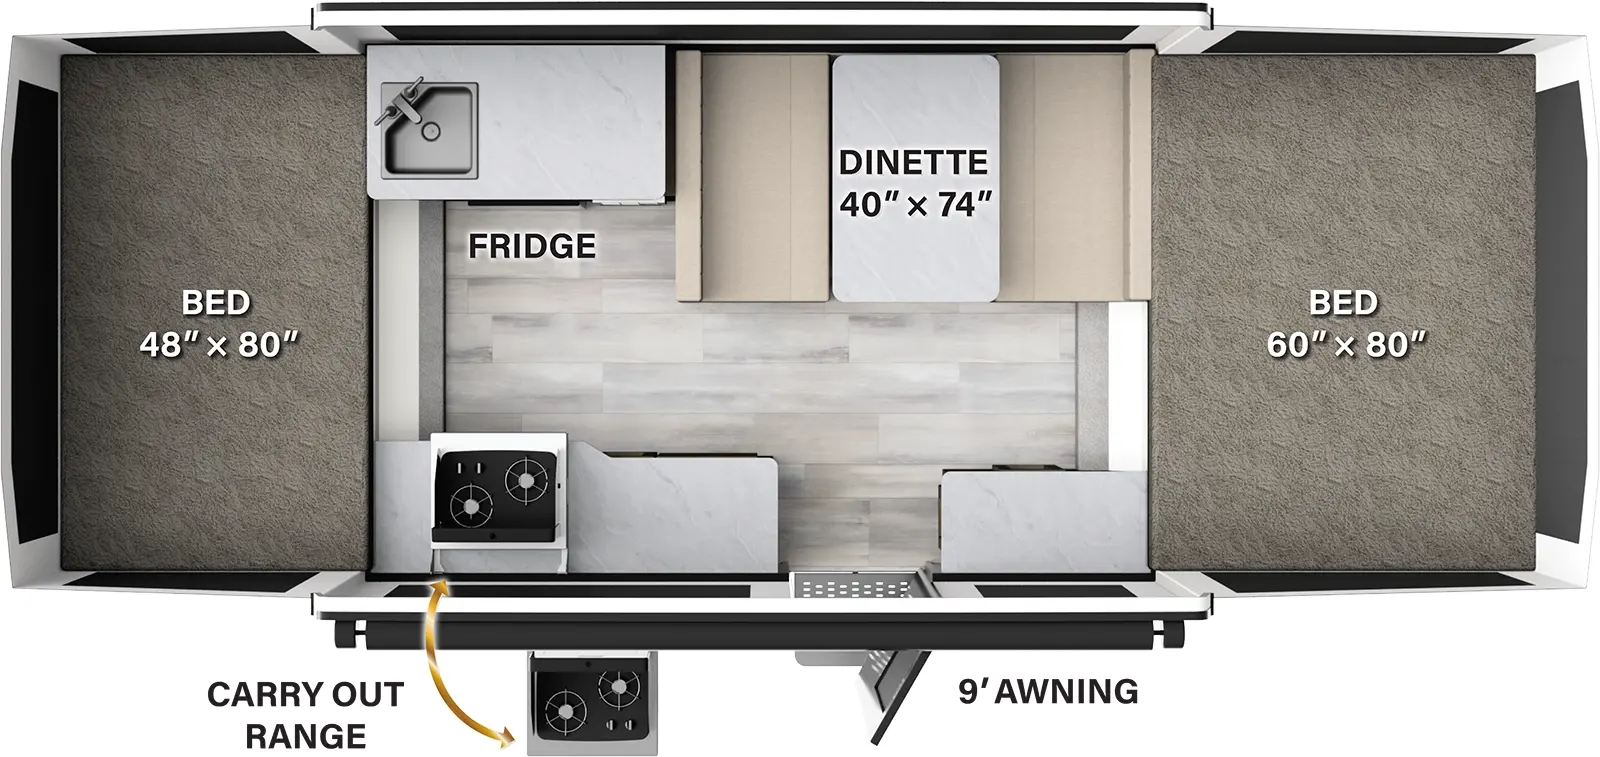 The 206LTD has no slideouts and one entry door. Exterior features a 9 foot awning and a carry out range. Interior layout front to back: tent bed; kitchen area with dinette, sink, refrigerator, two cabinets, and a carry out range; rear tent bed.